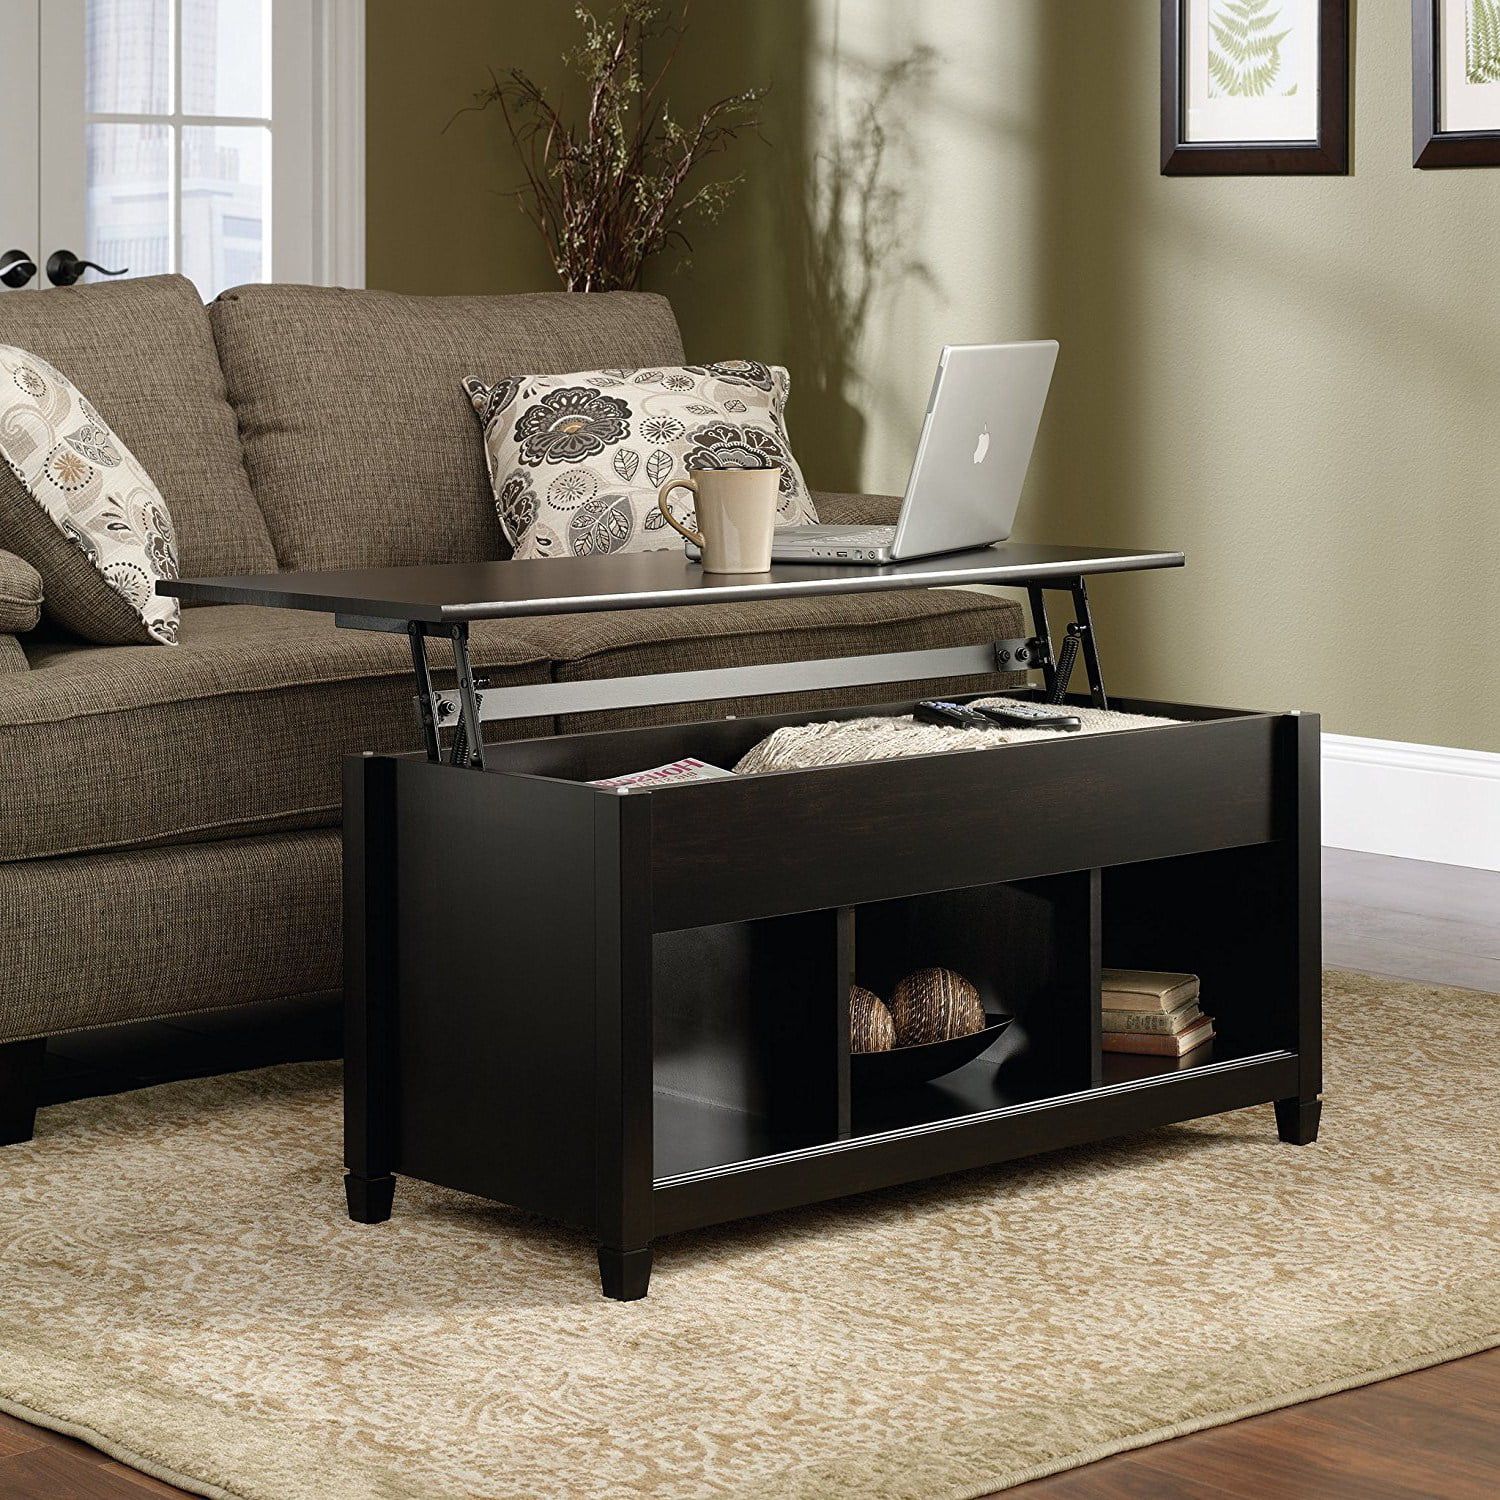 Zimtown Lift Up Top Coffee Table With Hidden Compartment End Rectangle In Lift Top Coffee Tables With Hidden Storage Compartments (Gallery 3 of 20)